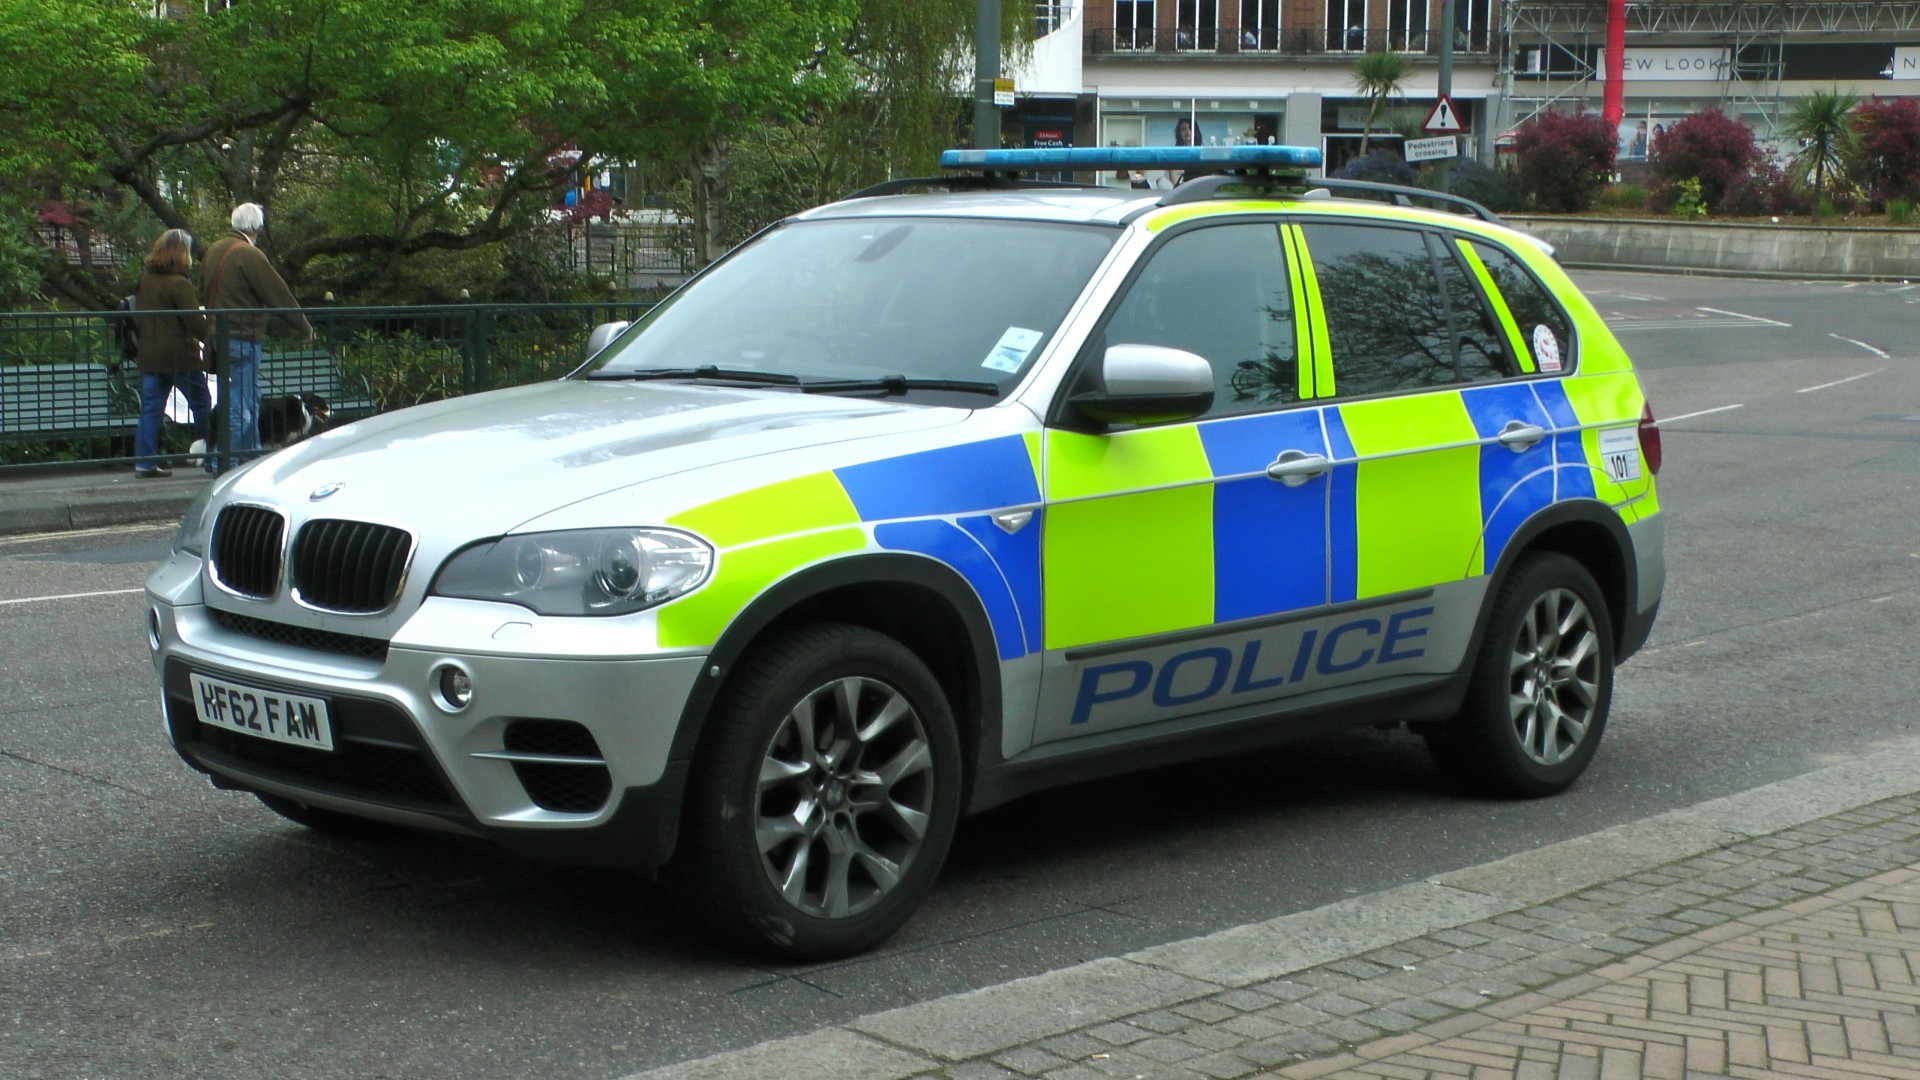 police armed response unit car police police force free photo